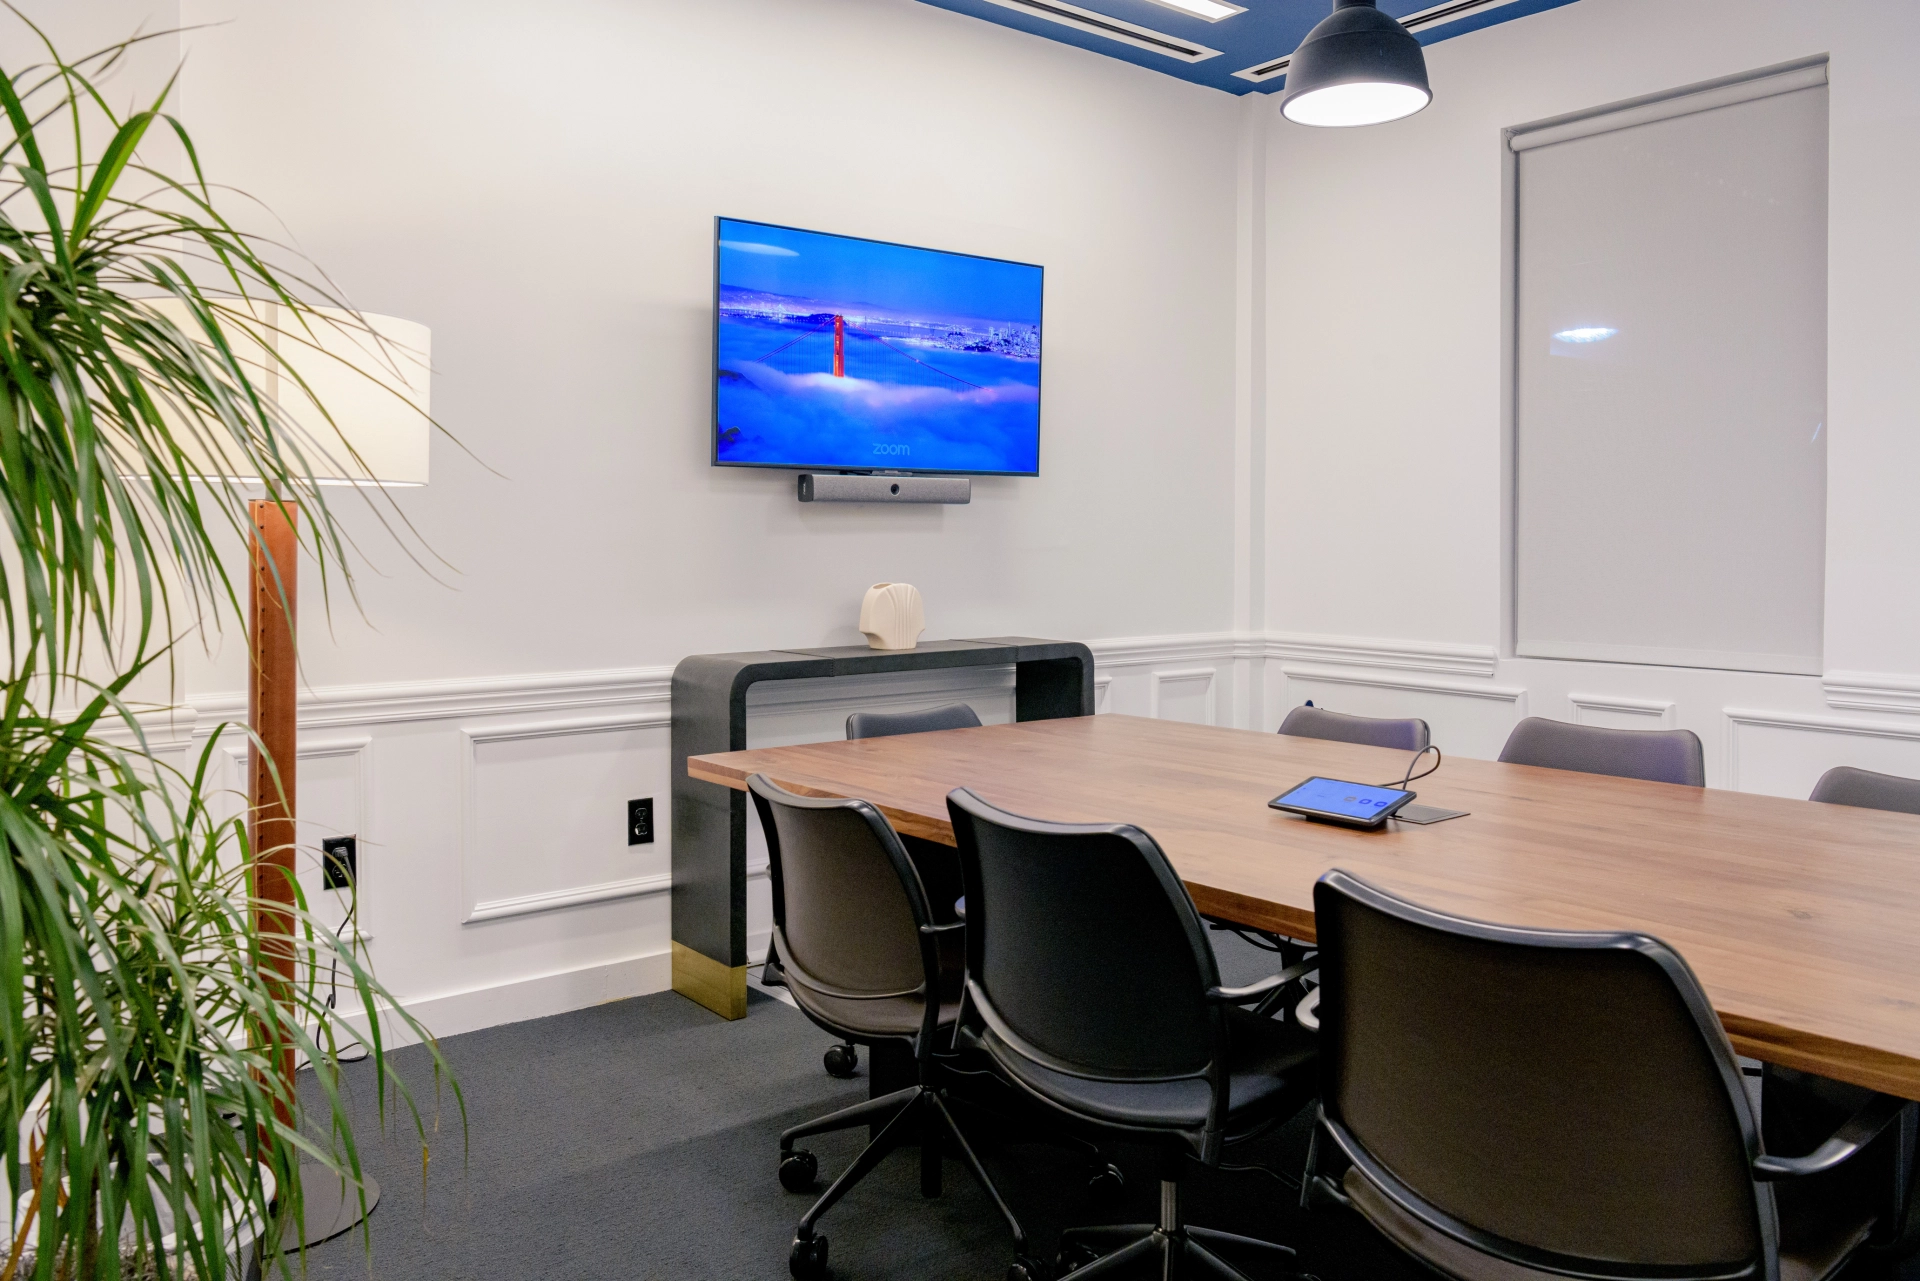 A Miami Beach meeting room with a TV on the wall.